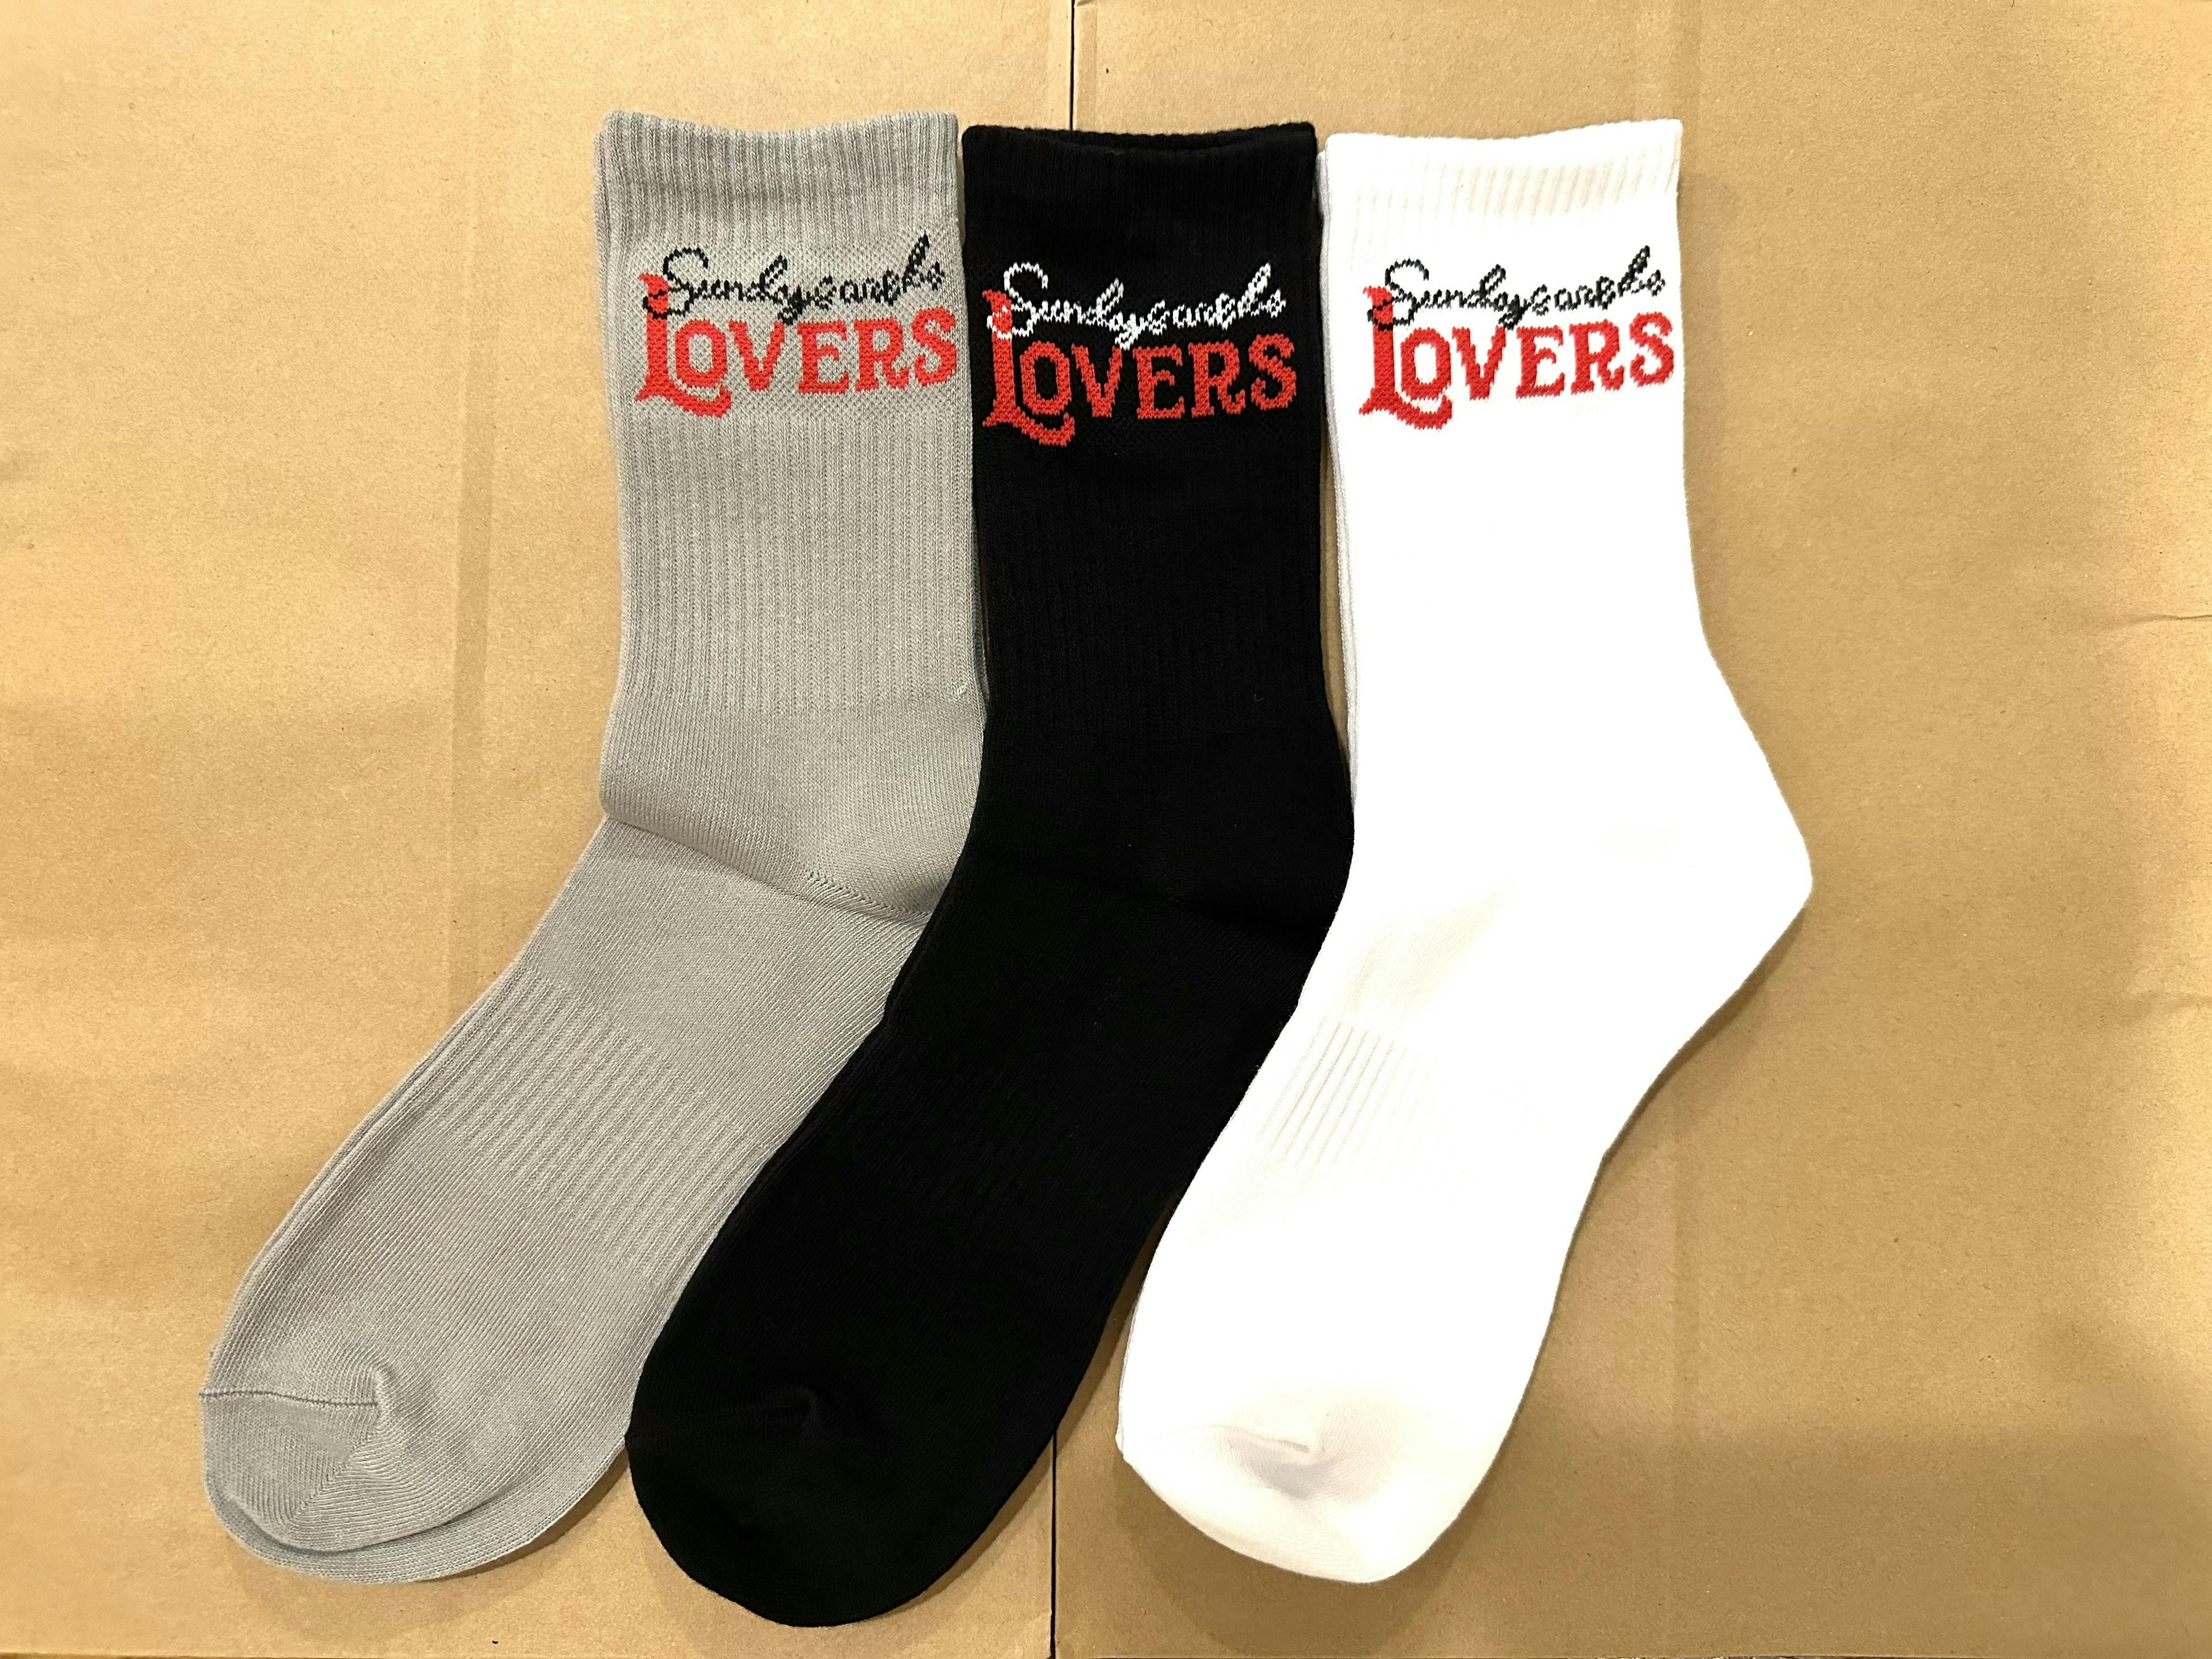 Sundays are for Lovers Sock set